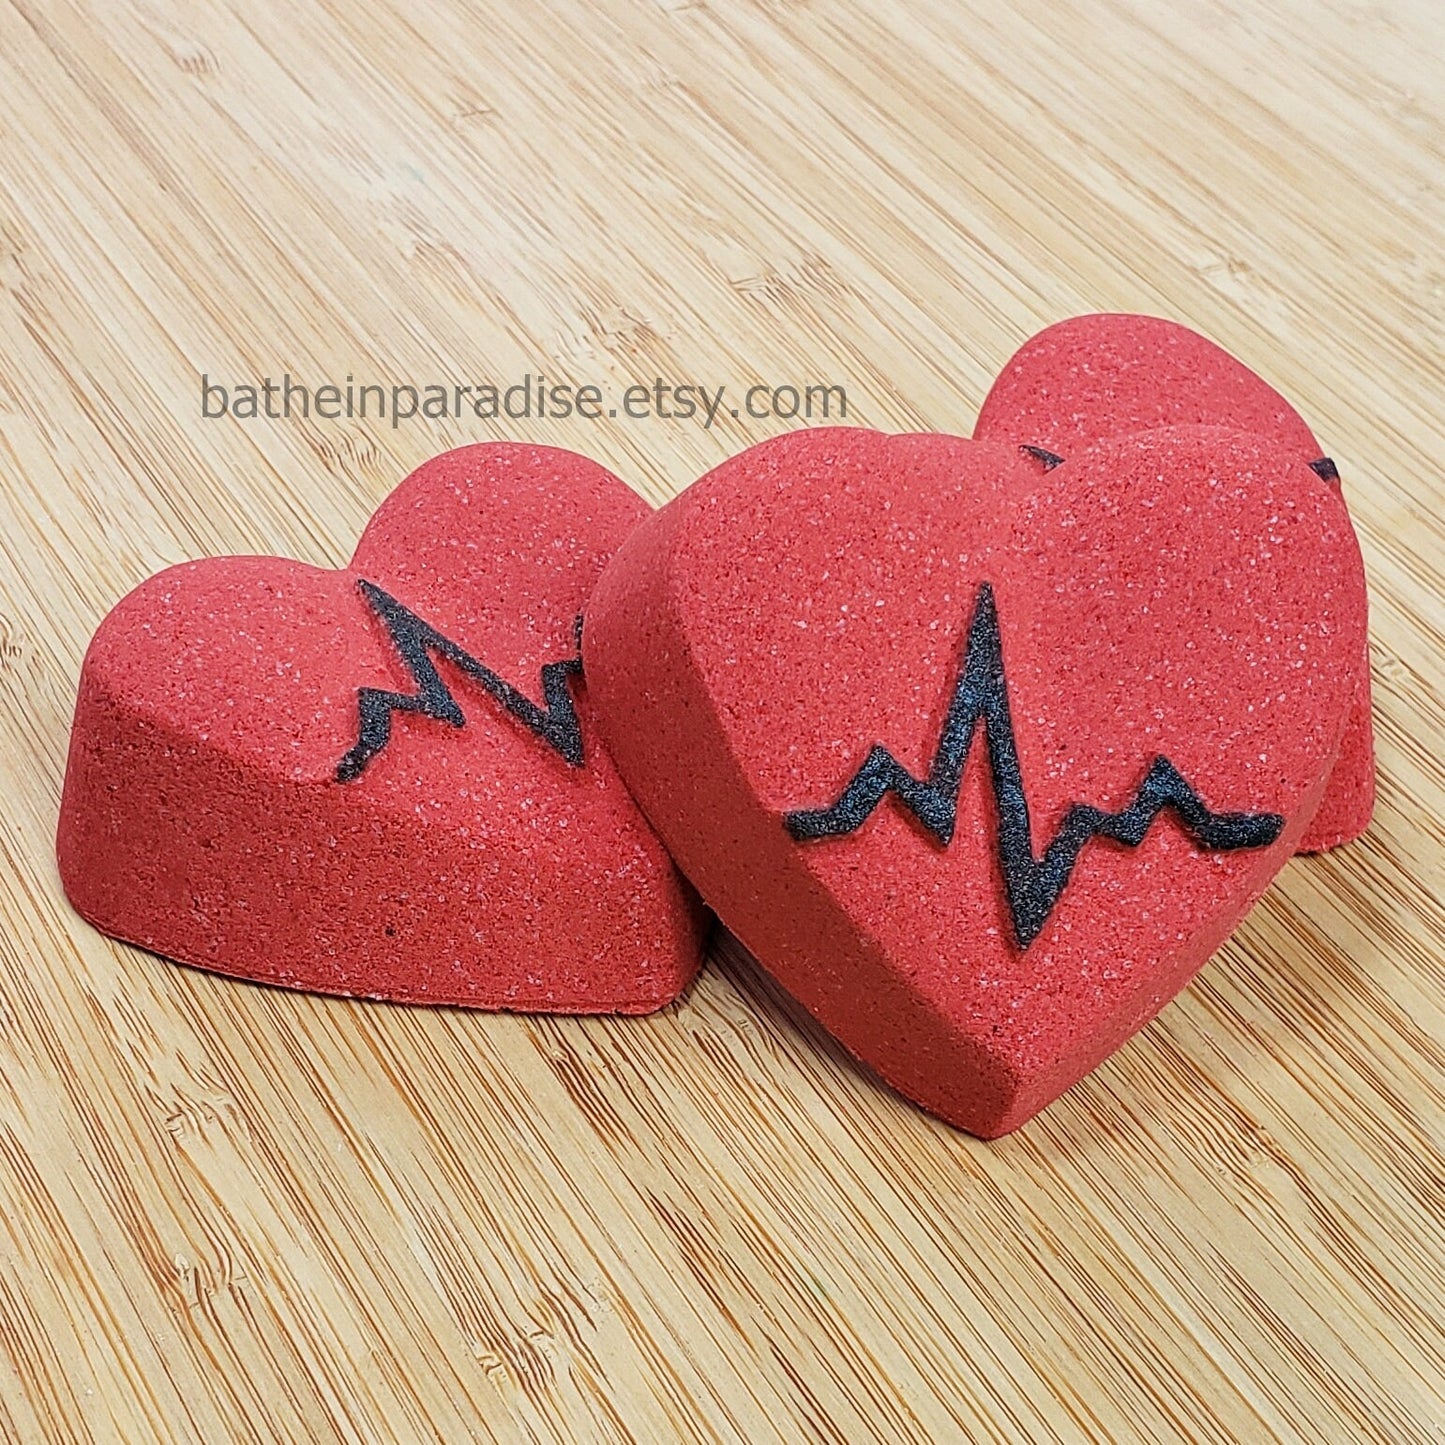 Heartbeat or Medical Kit Bath Bomb | 2.8 x 2.5 x 1.15 inches | Gifts for Nurses Medical Professional